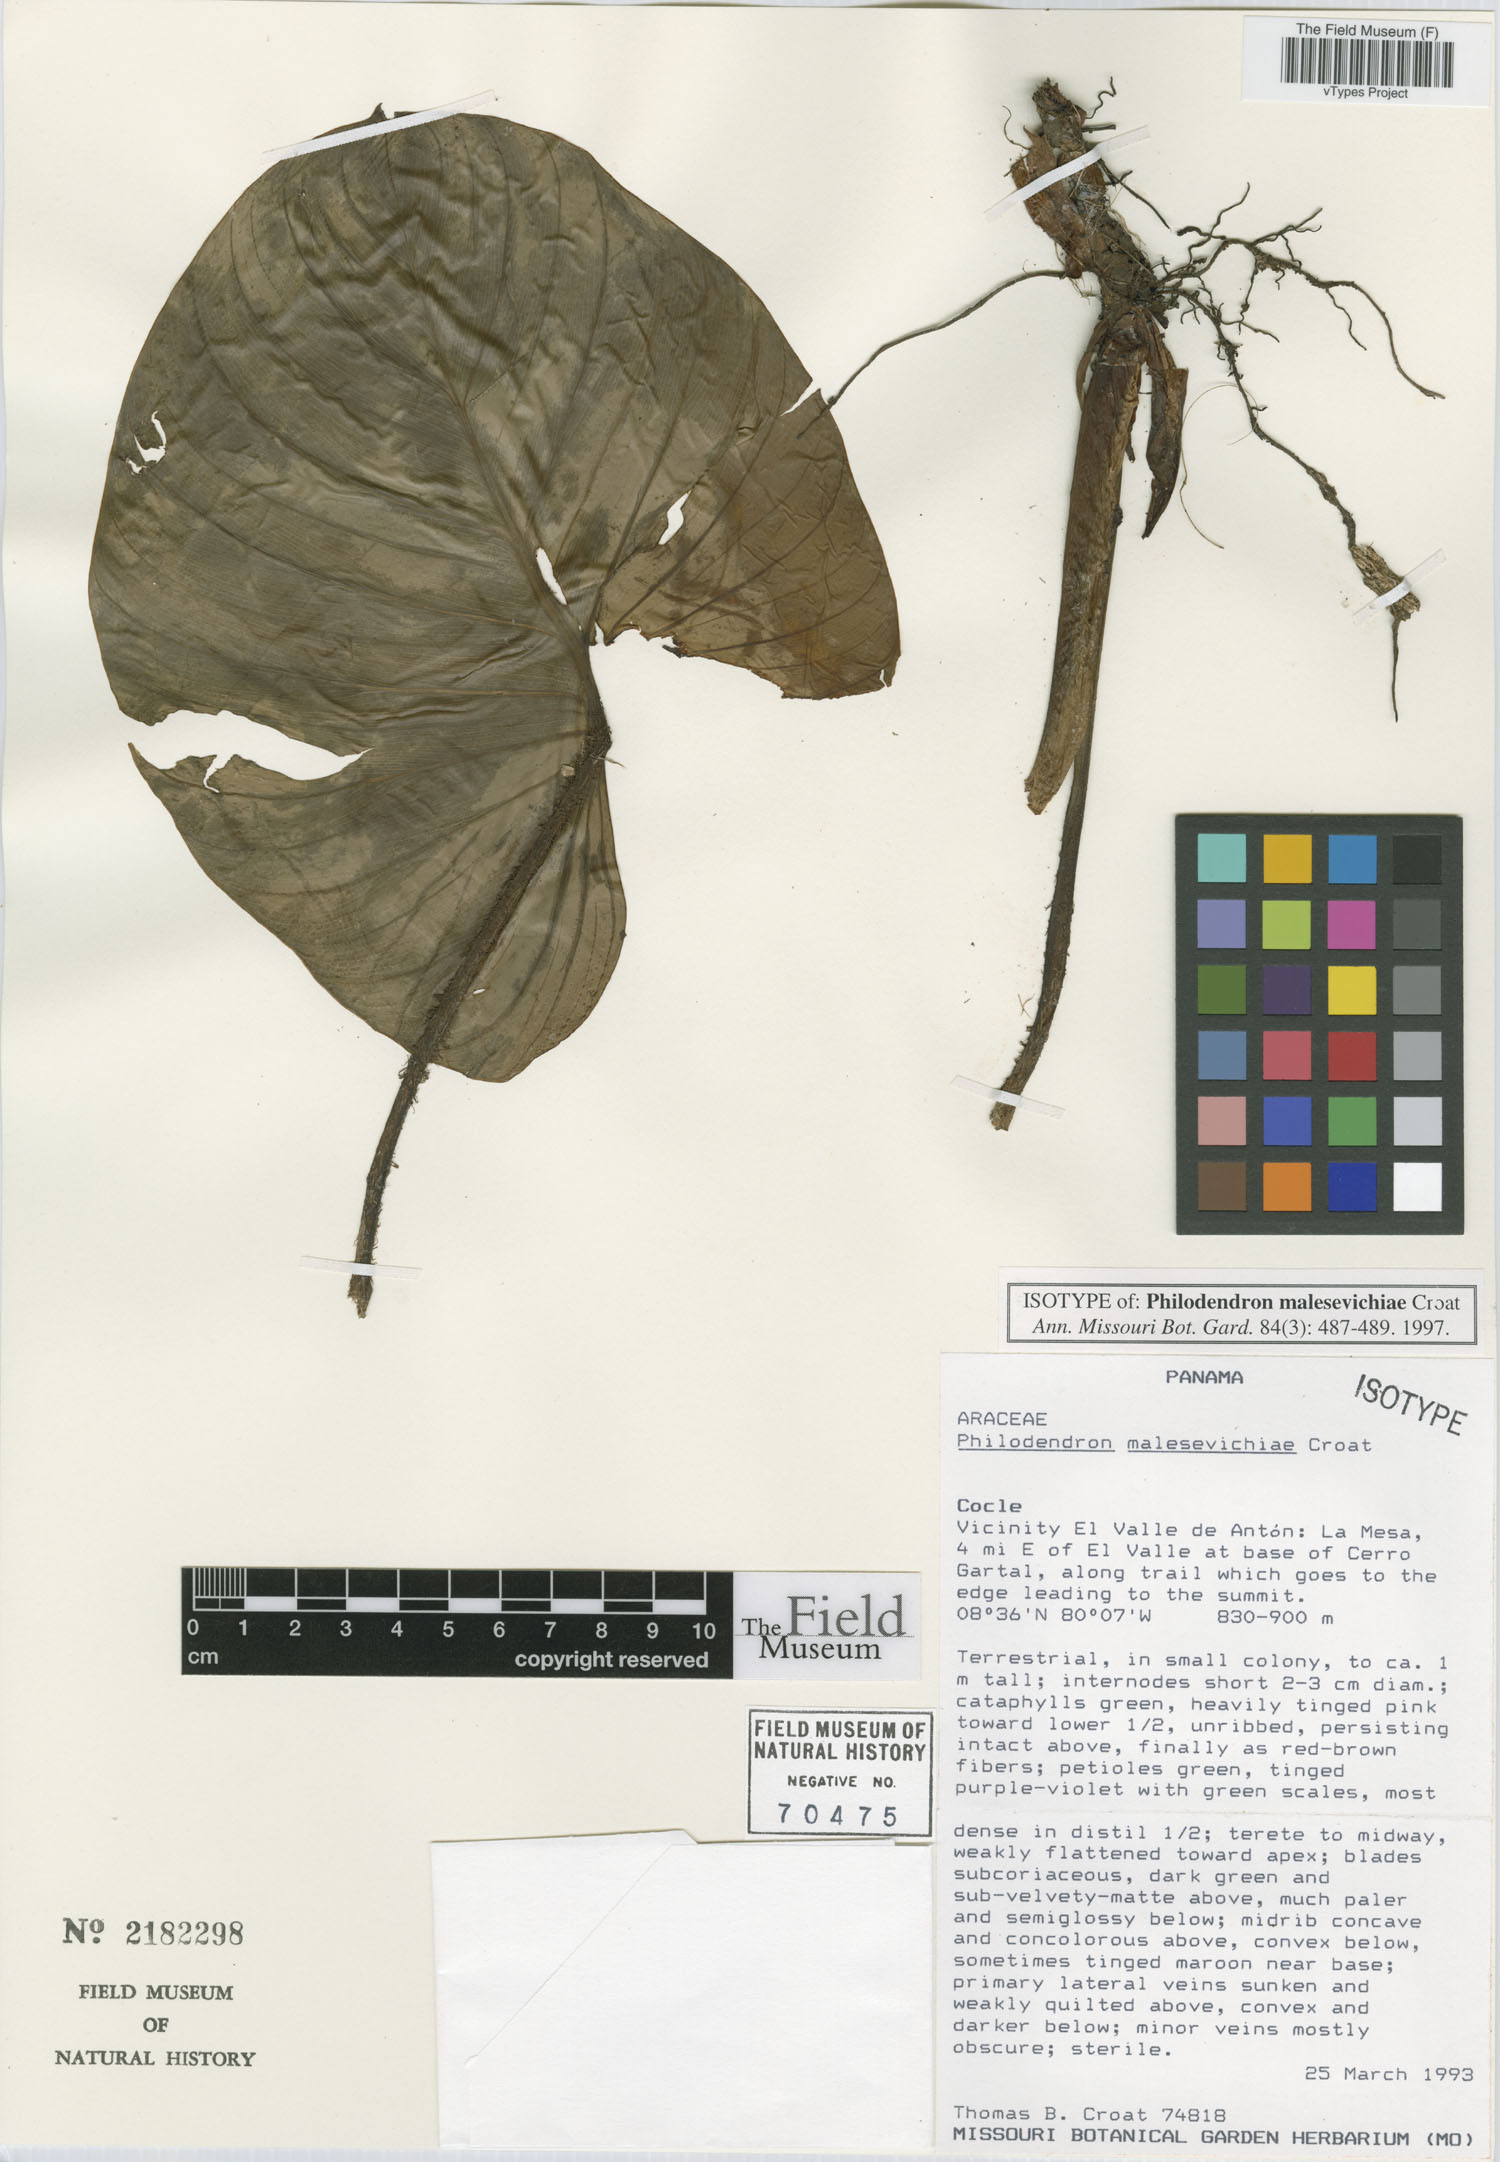 Philodendron malesevichiae image